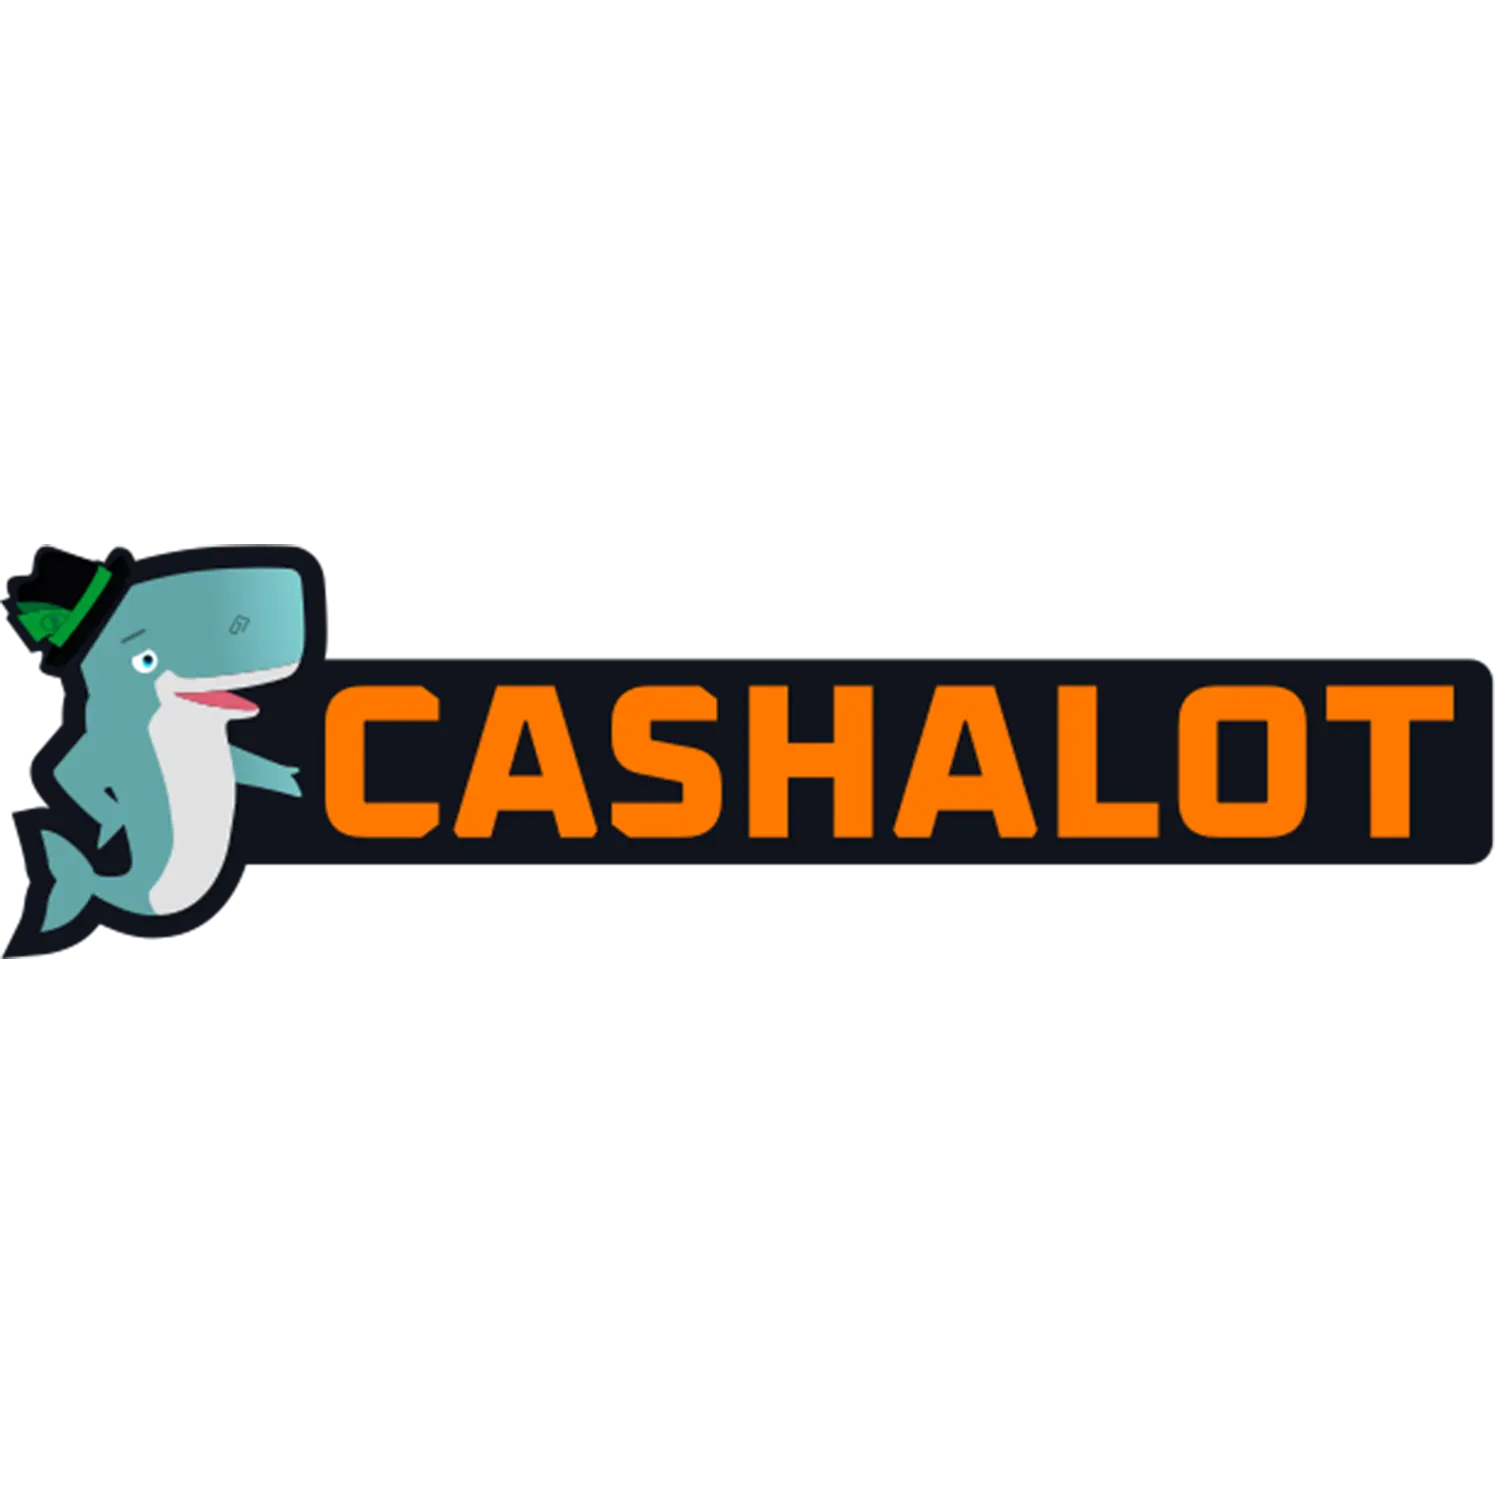 Cashalot is the best betting company on the market.